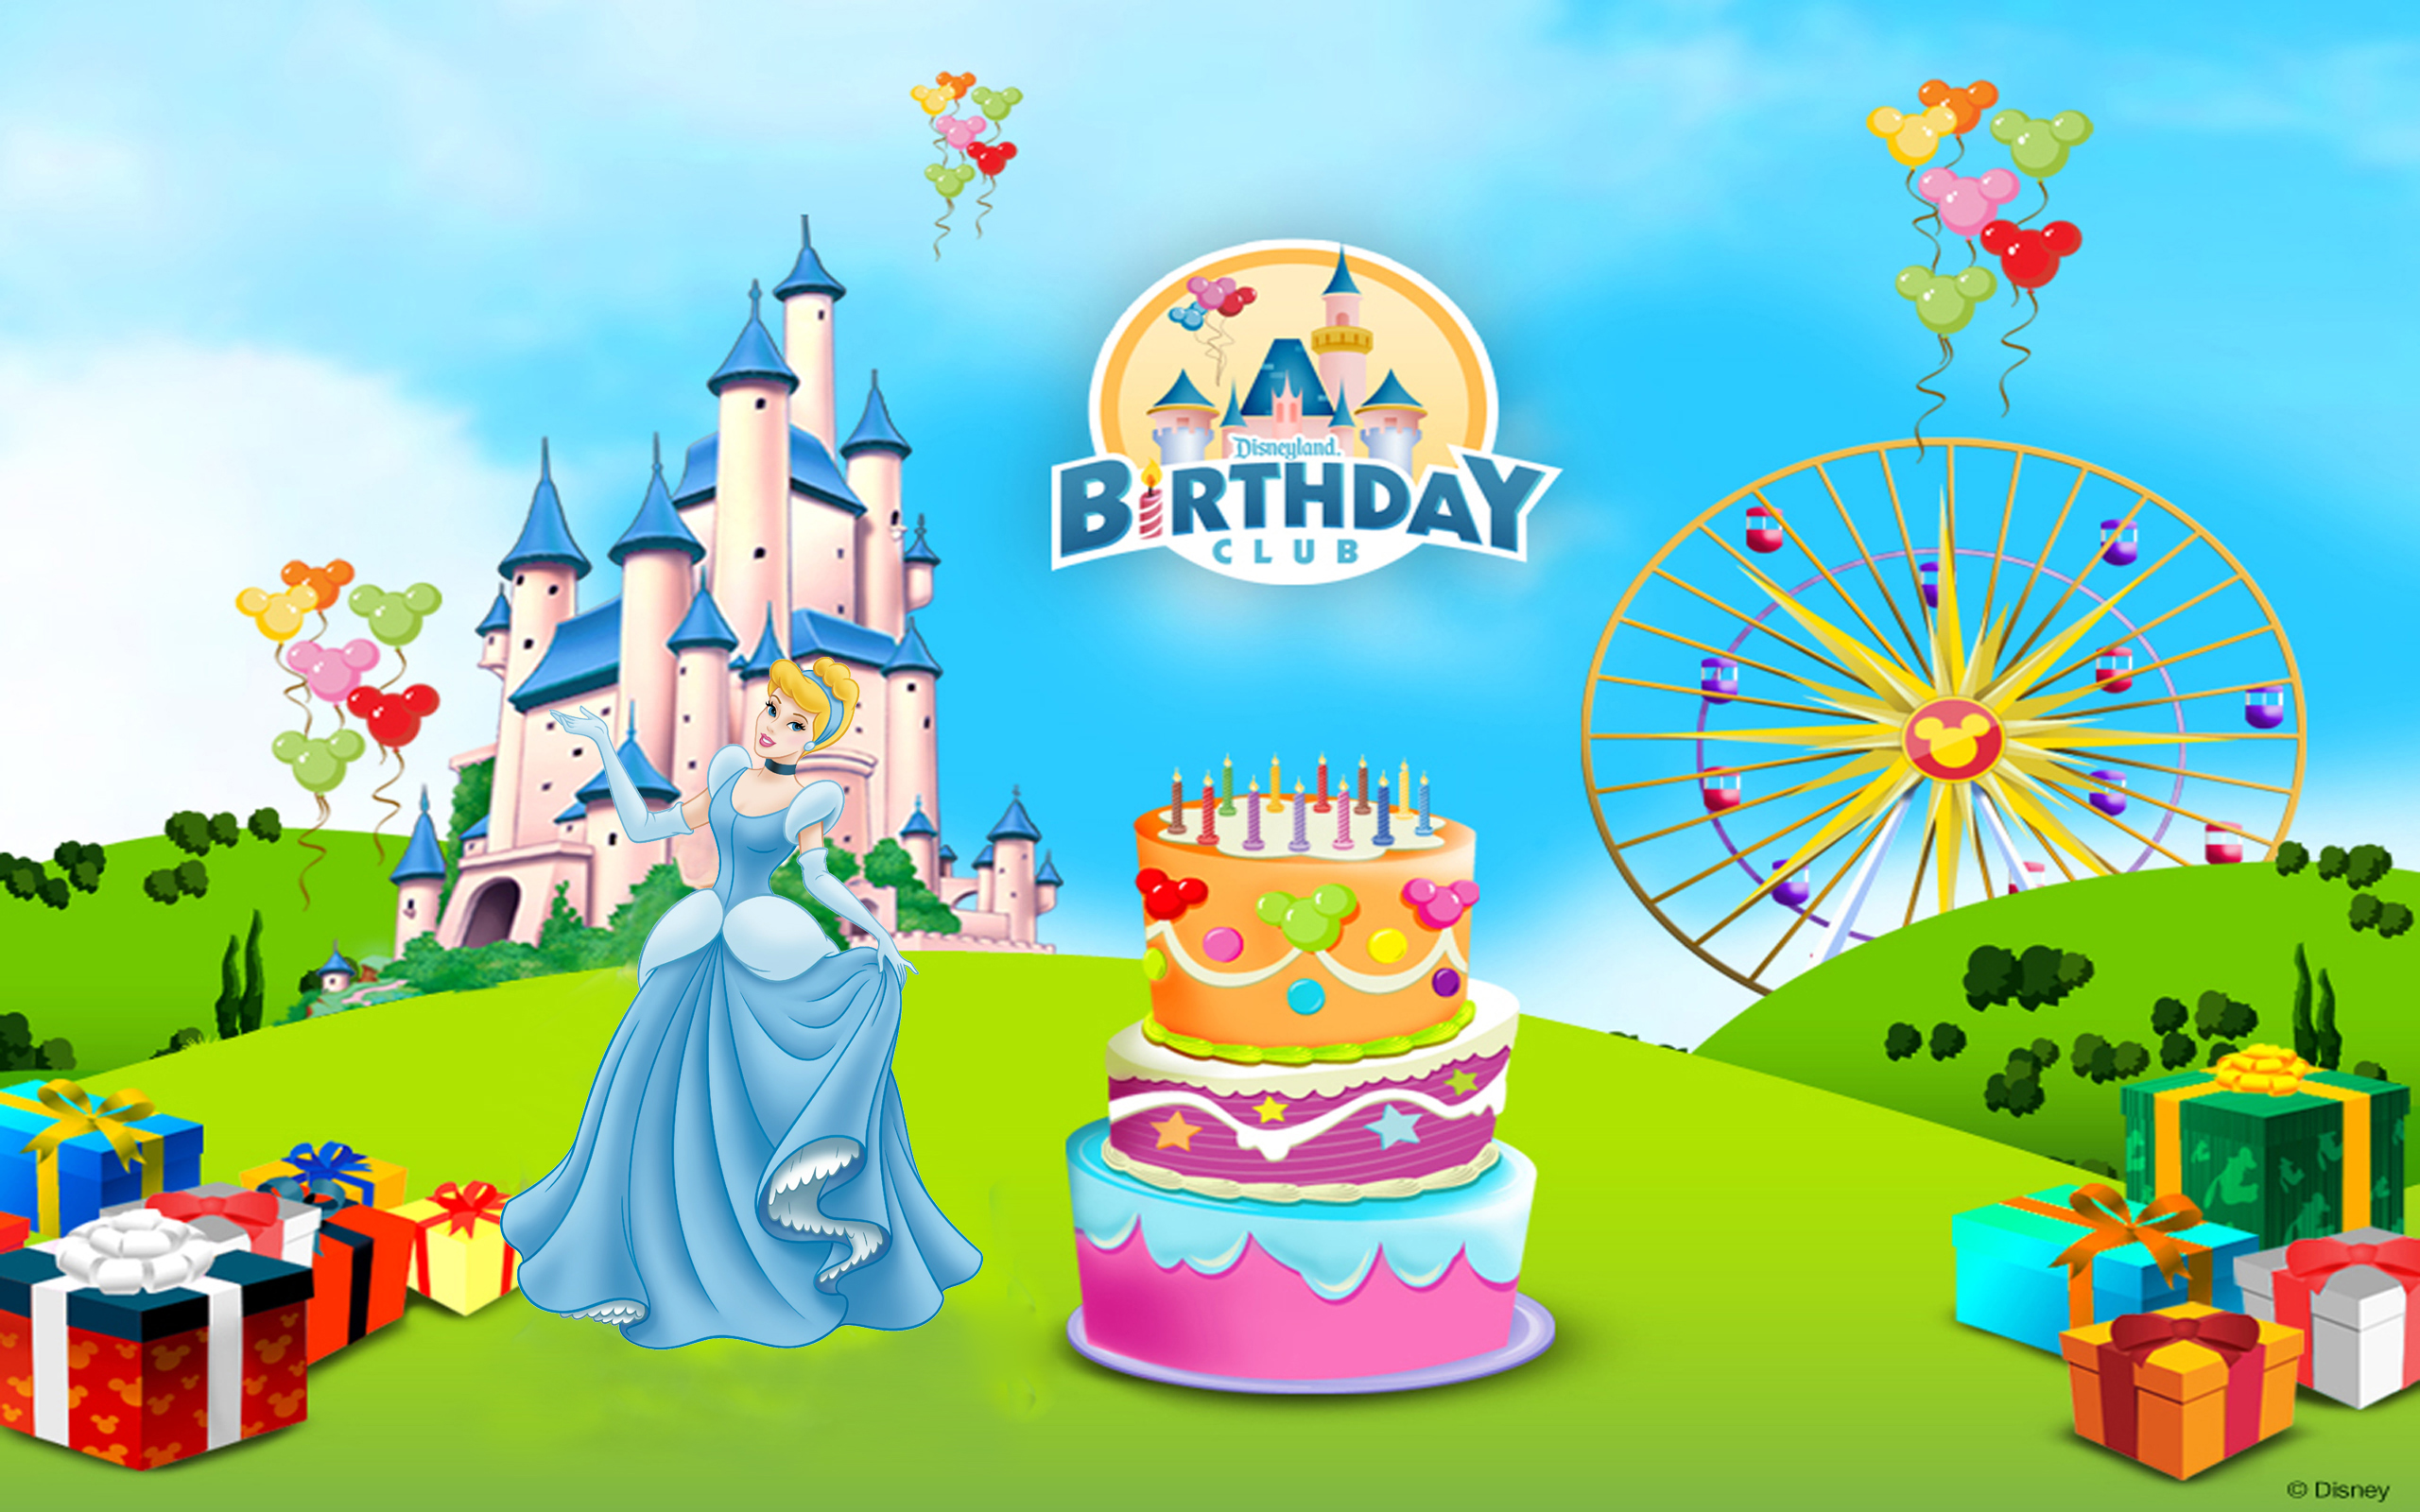 Disney princess story theater free download for android apk